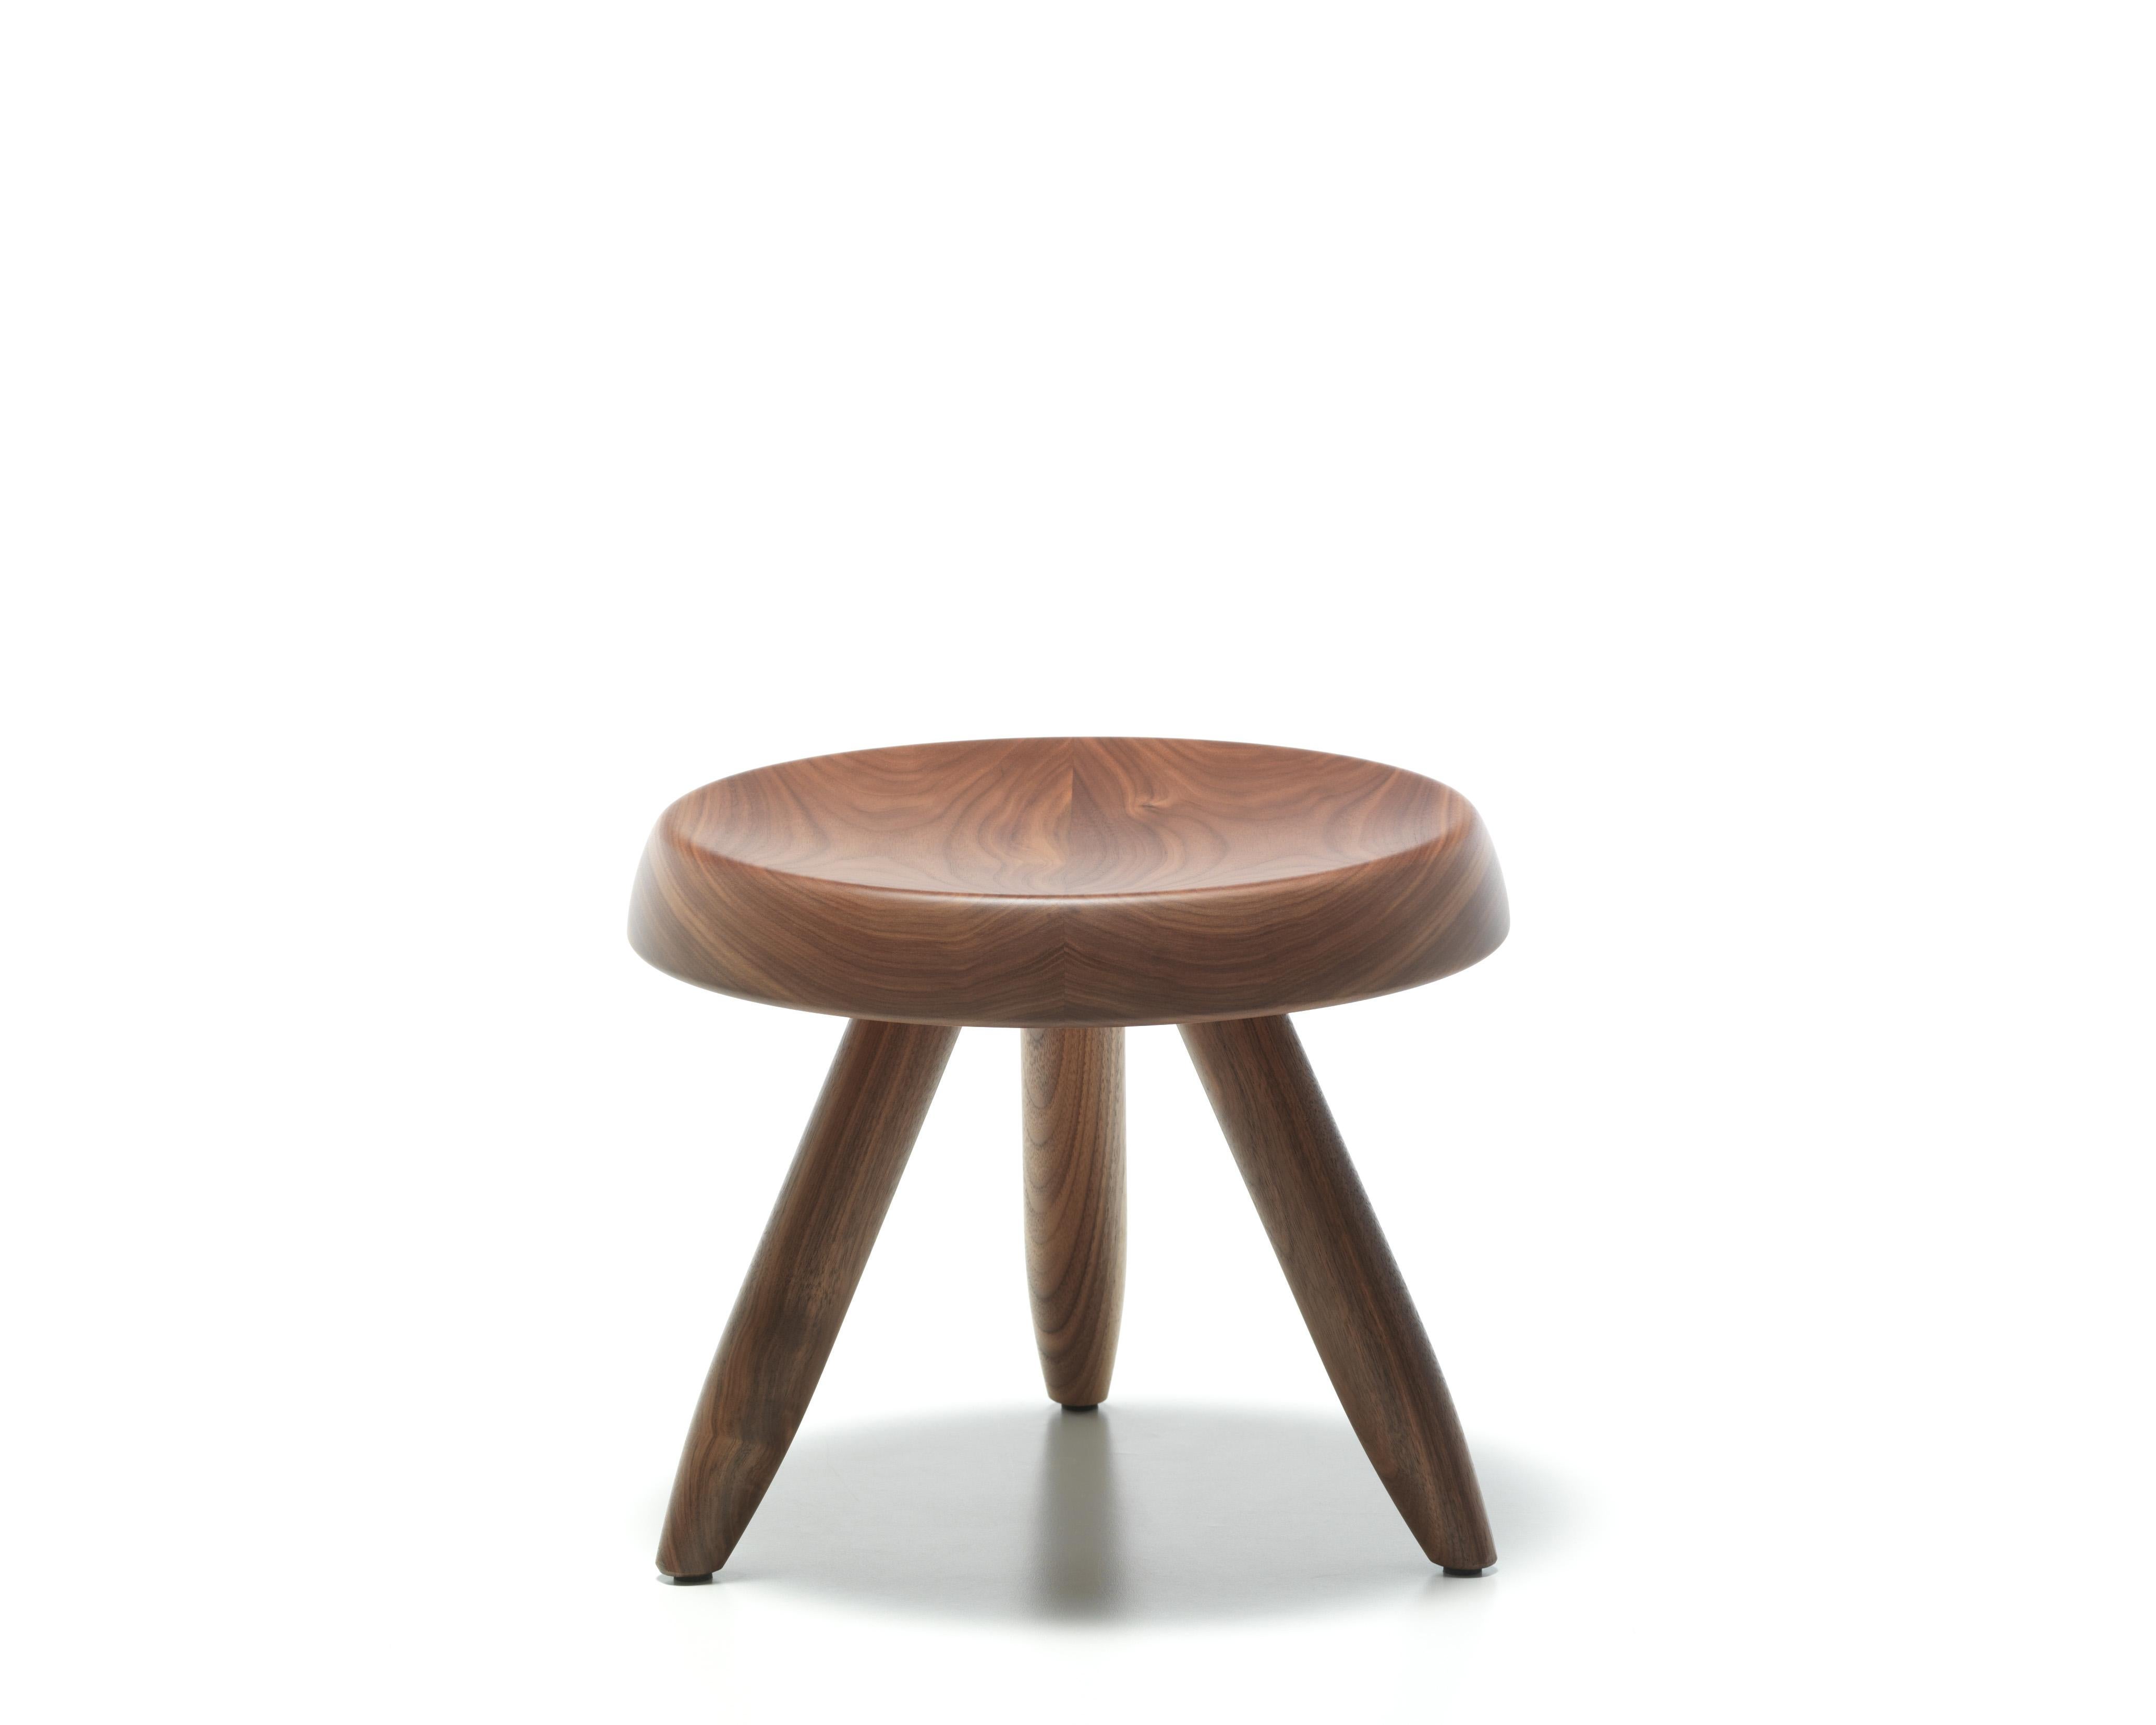 Charlotte Perriand Berger Wood Stool by Cassina In New Condition For Sale In Barcelona, Barcelona